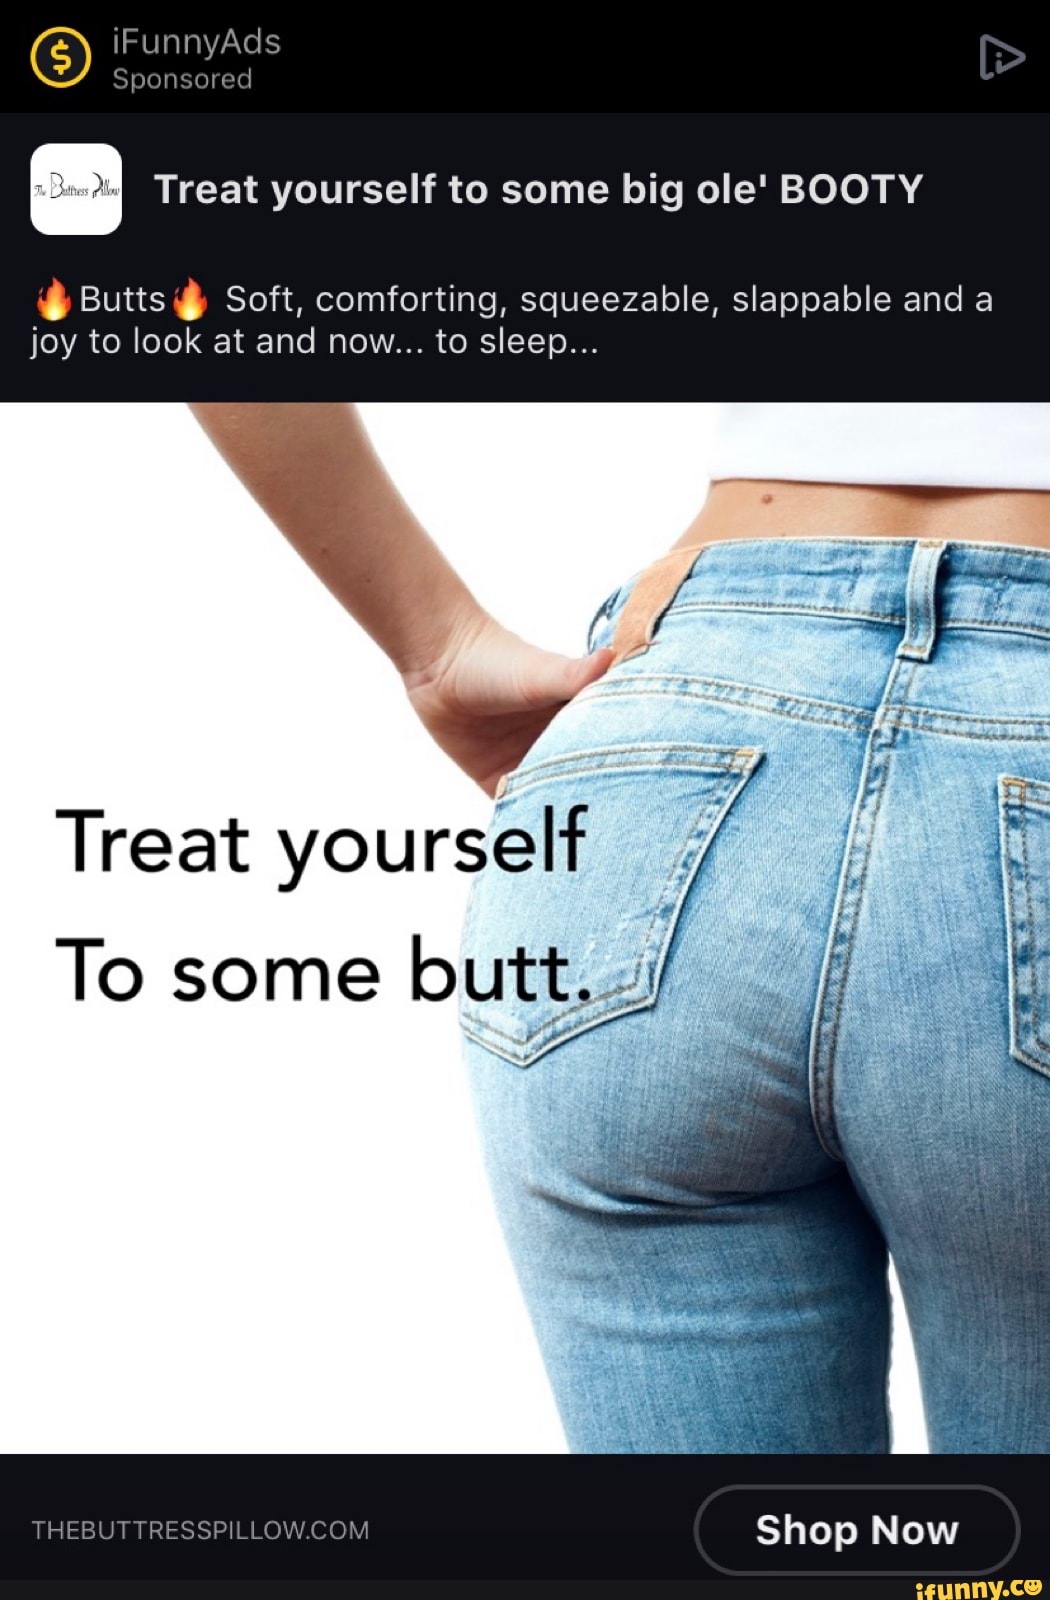 On Ifunnyads Sponsored Treat Yourself To Some Big Ole Booty Butts Soft Comforting